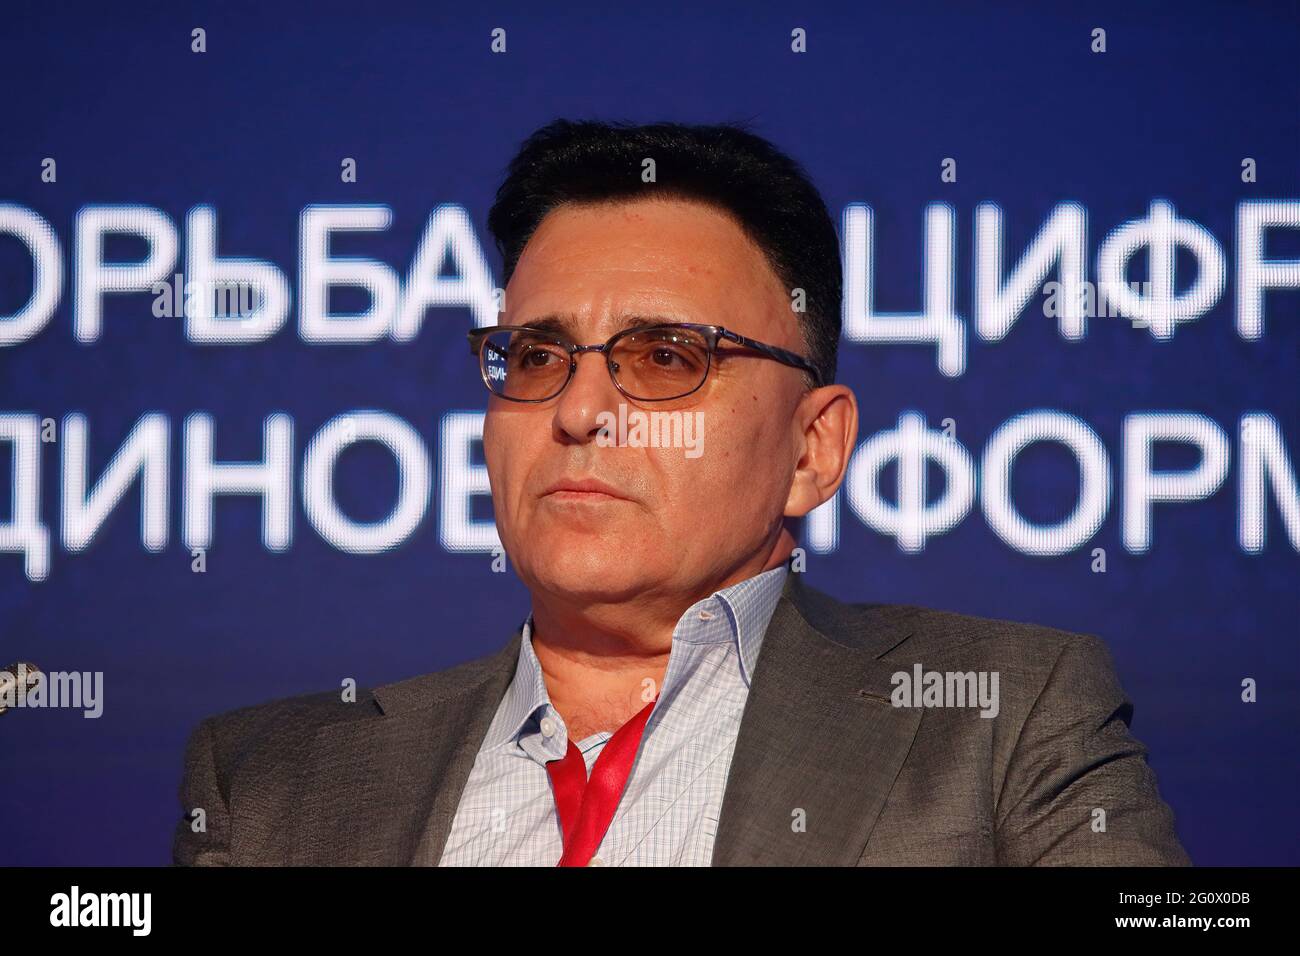 St. Petersburg, Russia. 03rd June, 2021. Alexander Zharov, Chief Executive Officer, Gazprom-Media Holding seen during the St. Petersburg International Economic Forum, Business programme on 'Maintaining a Single Digital Landscape in the Face of a Struggle for Digital Sovereignty'. Credit: SOPA Images Limited/Alamy Live News Stock Photo